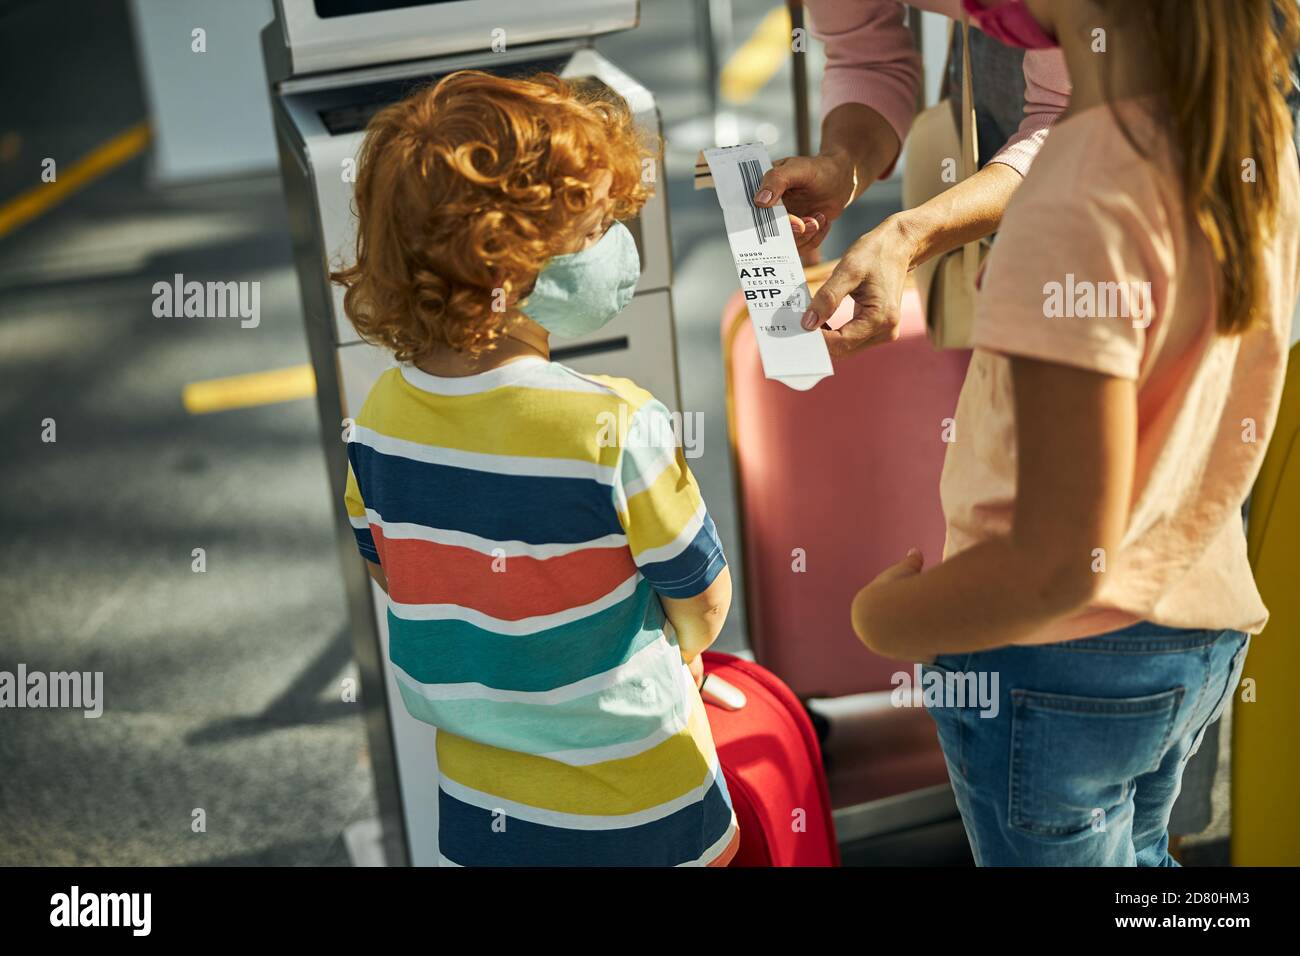 Woman showing children a tag from a bag drop counter Stock Photo